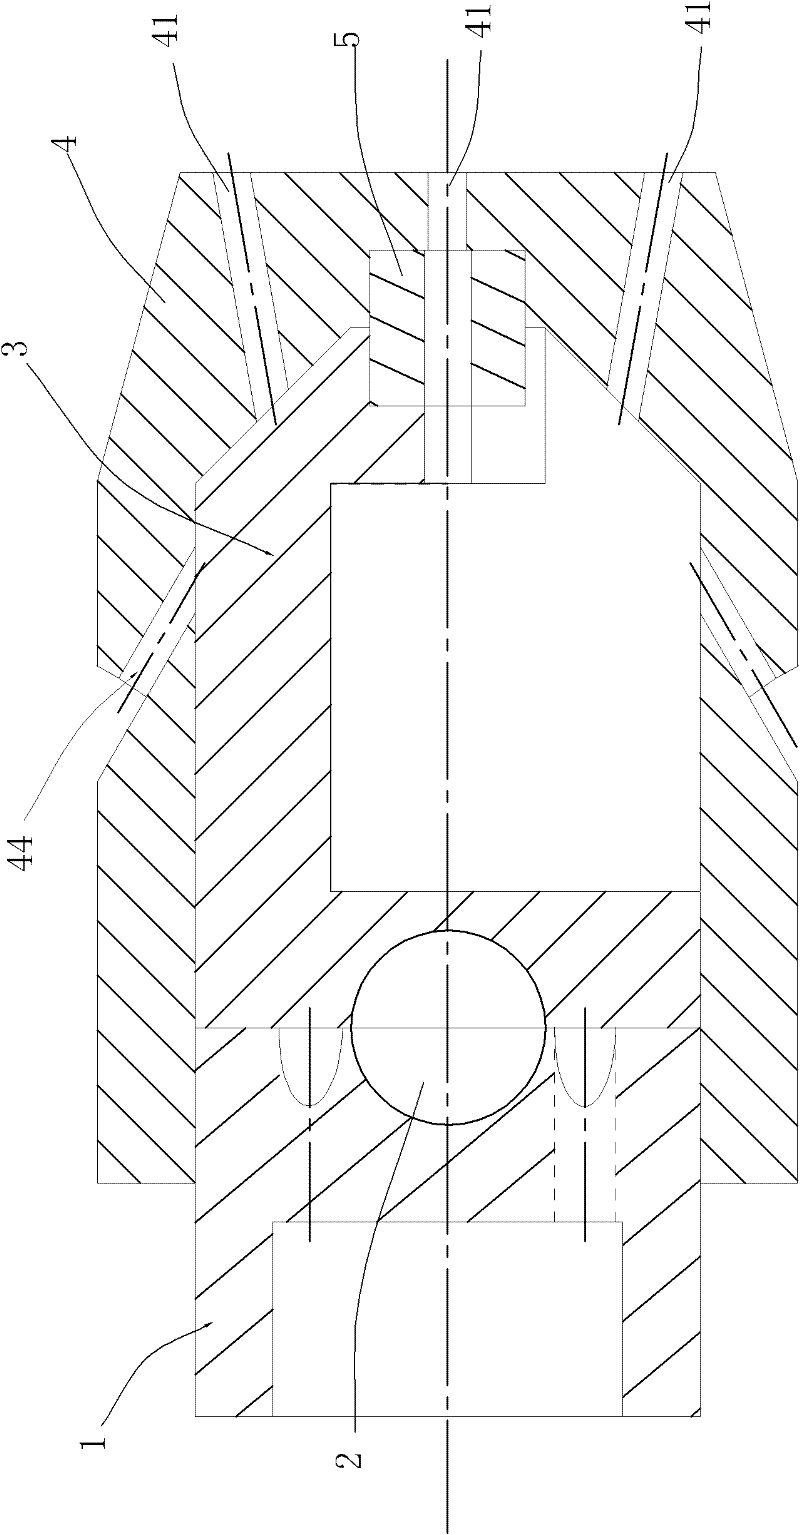 Self-propelled drilling method and pulsed cavitation swirling jet nozzle